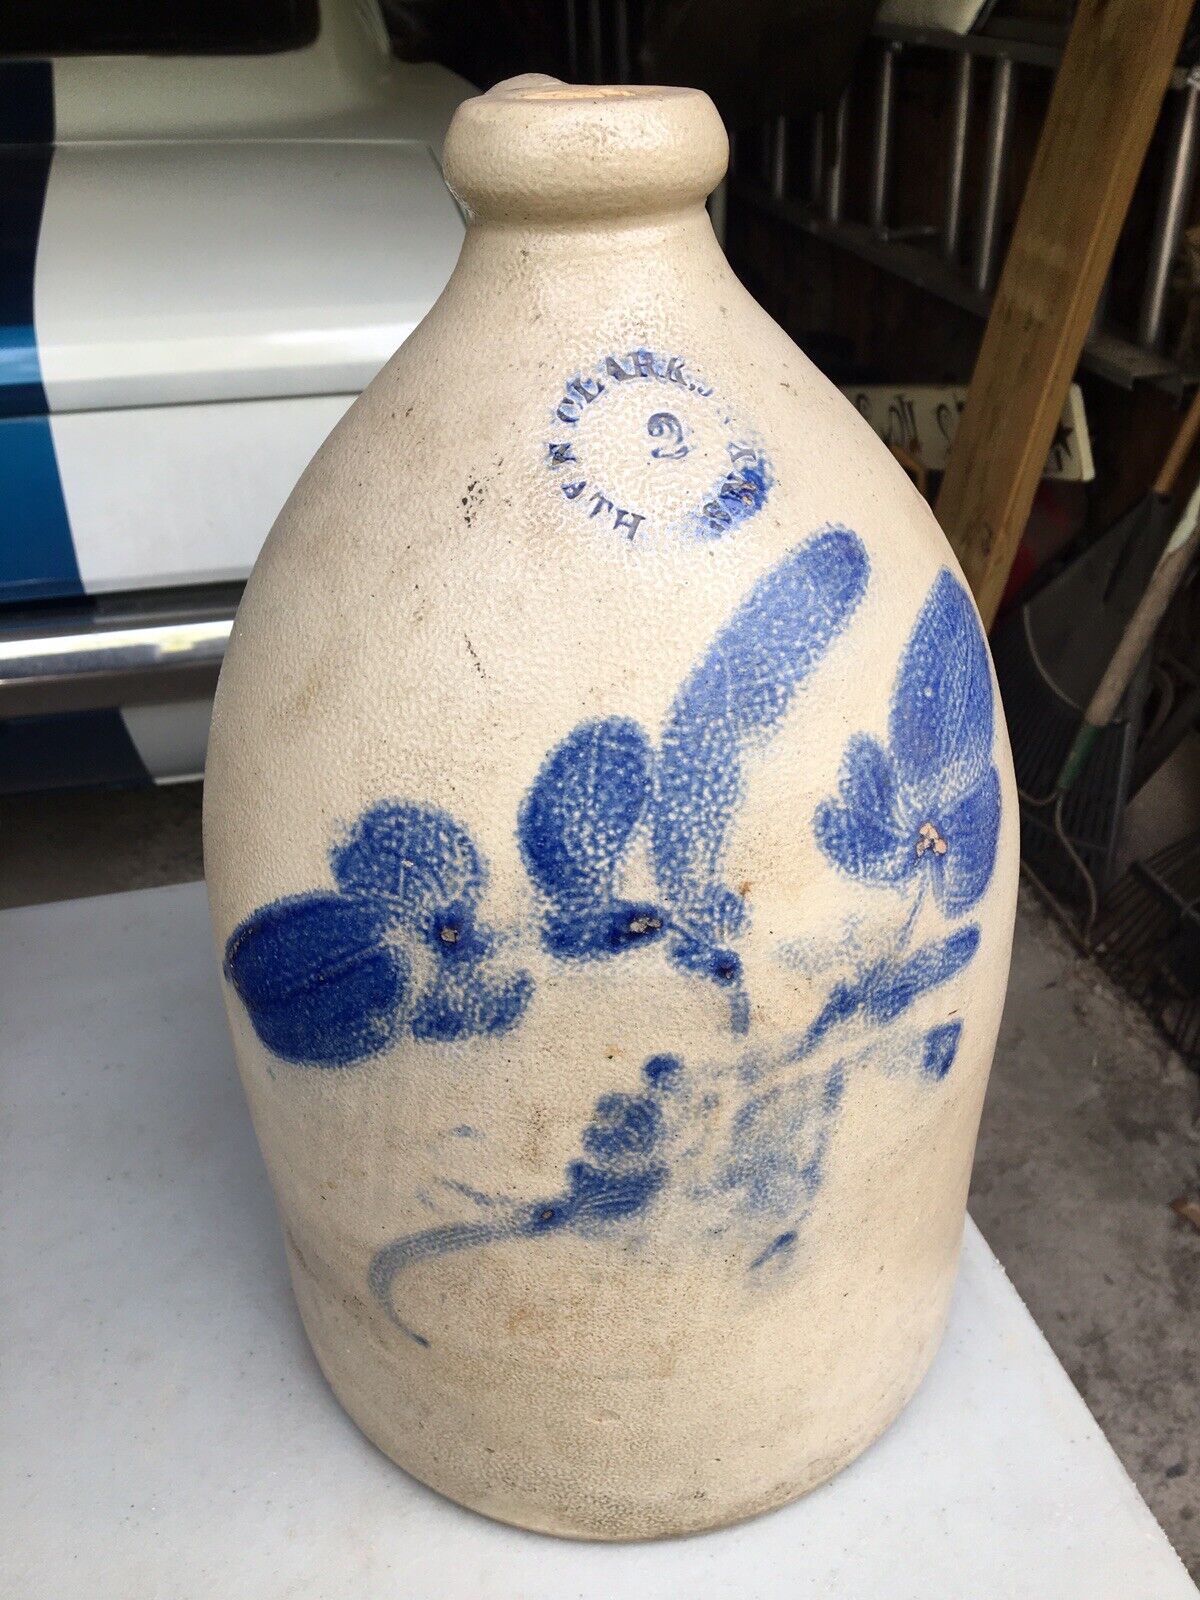 Large 2G Antique Cobalt Decorated Country Stoneware Jug by N Clark Jr, Athens NY